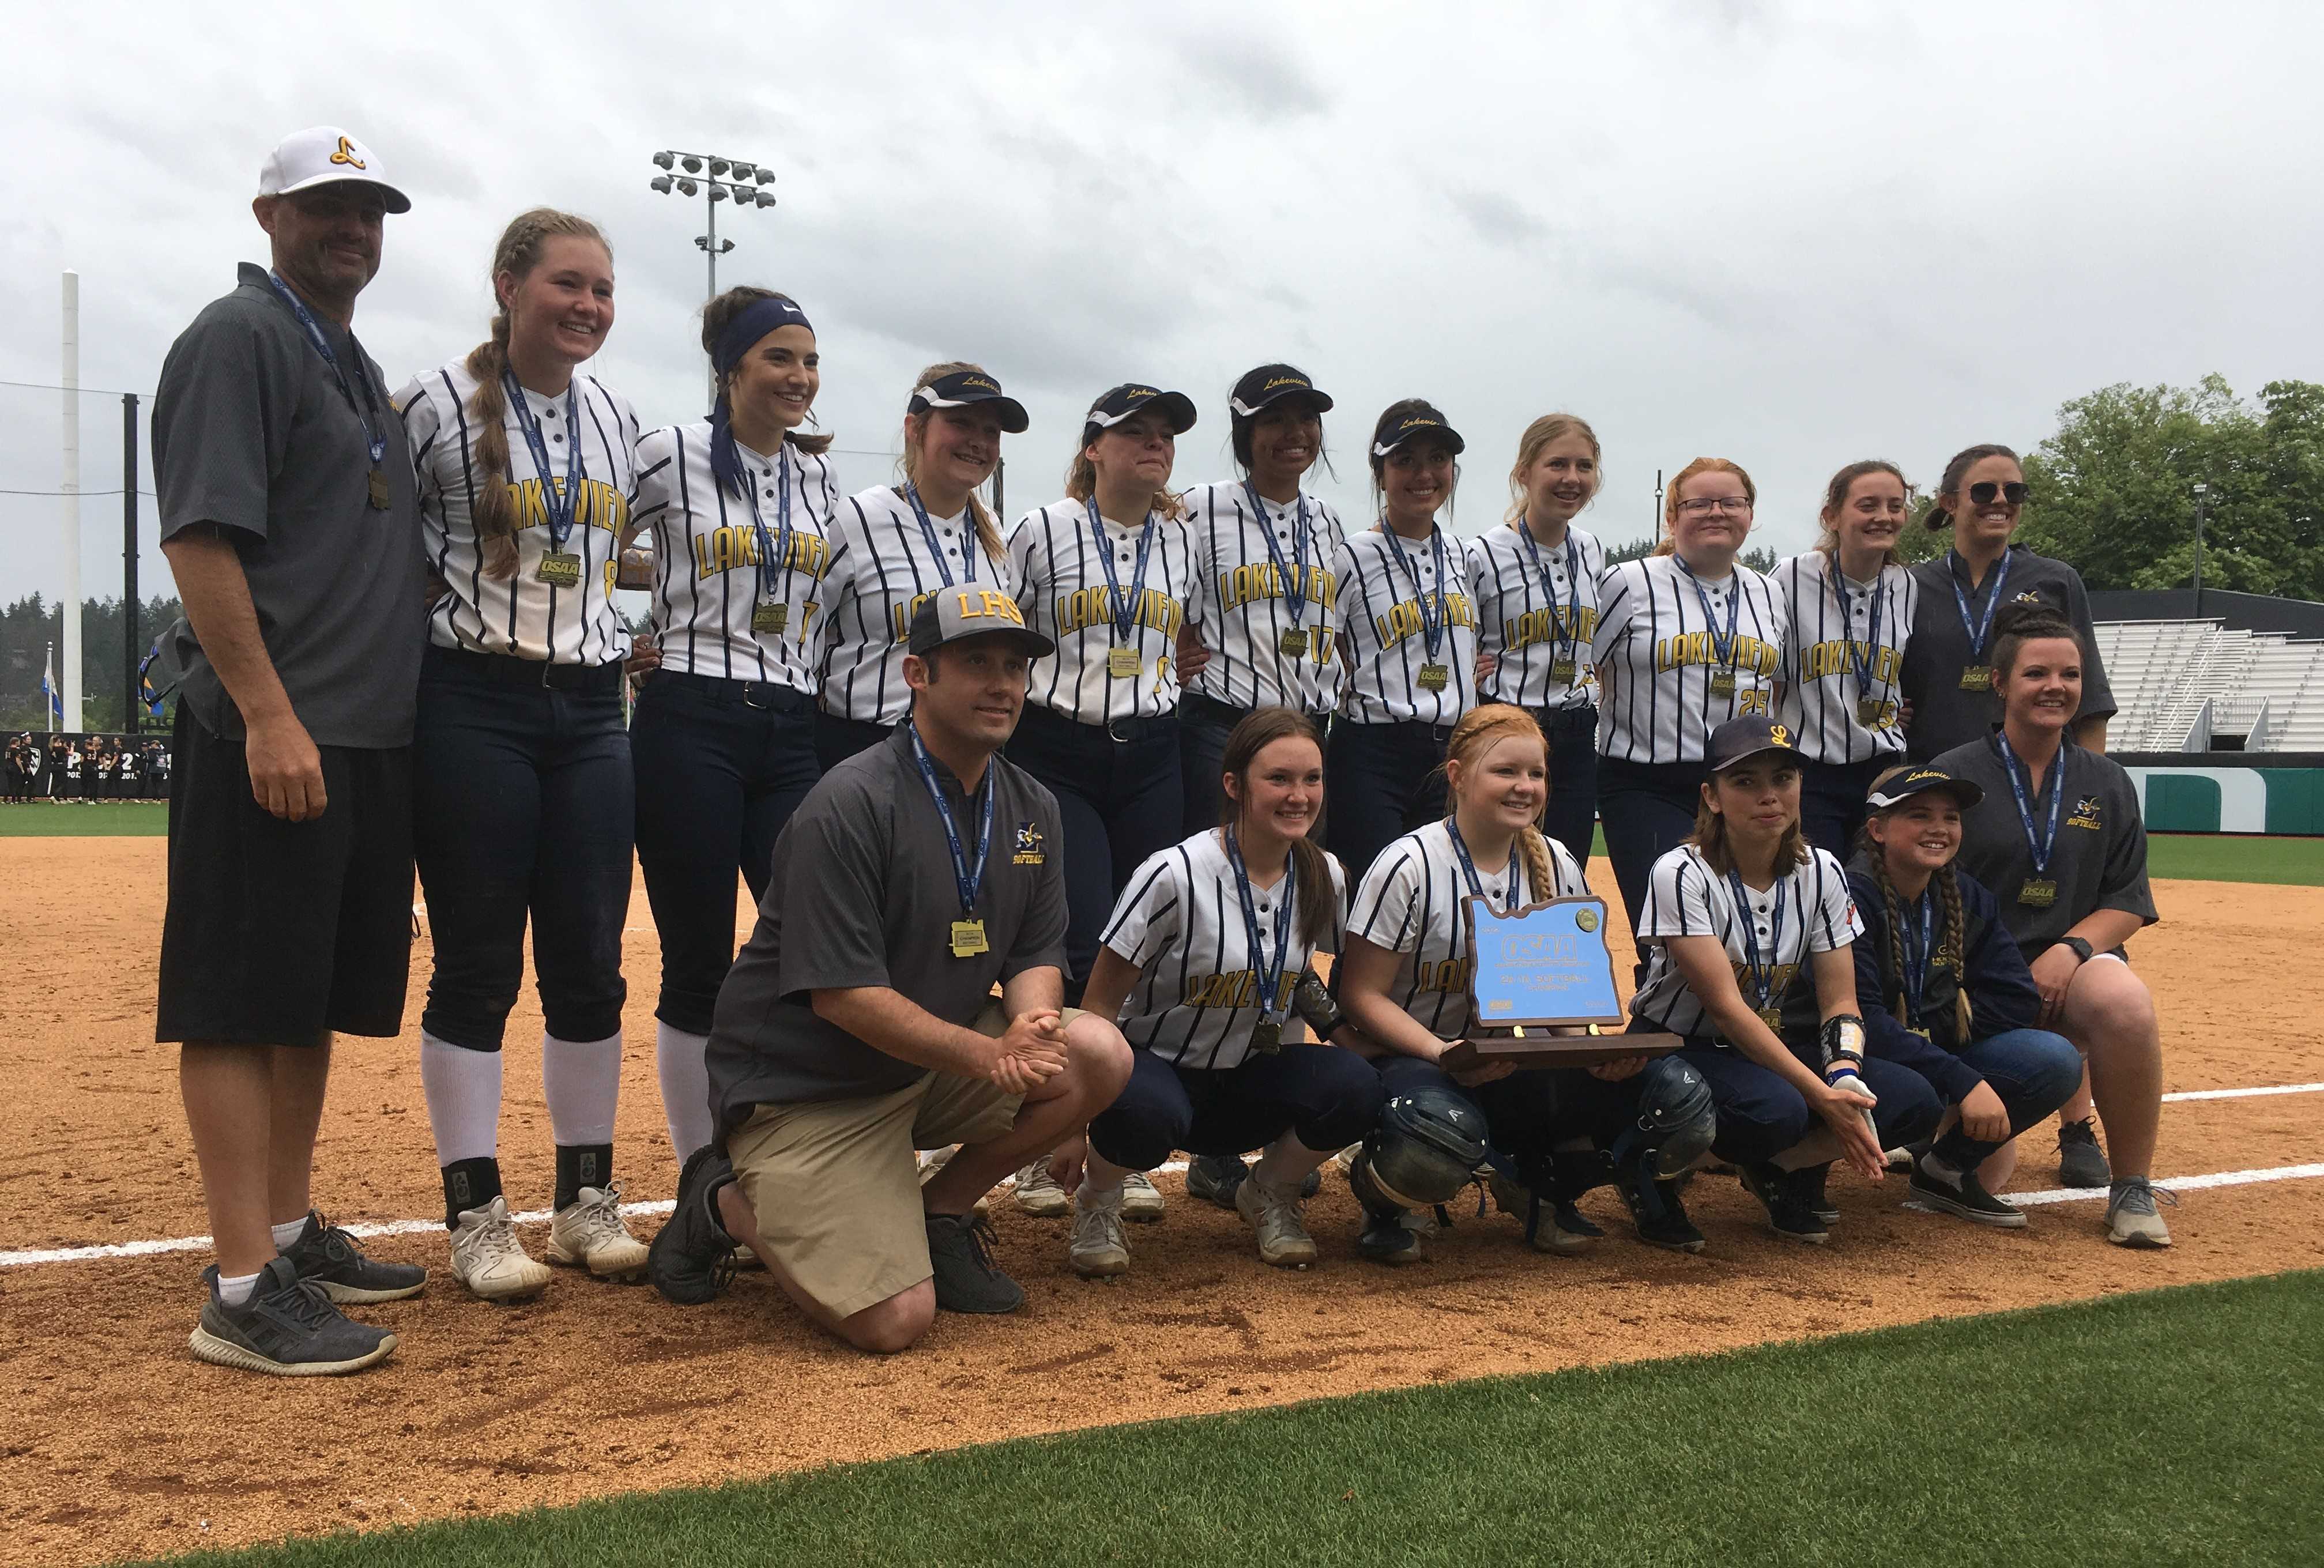 Lakeview claimed its first softball state championship Friday by beating top-seeded Grant Union 5-3 in the 2A/1A final.